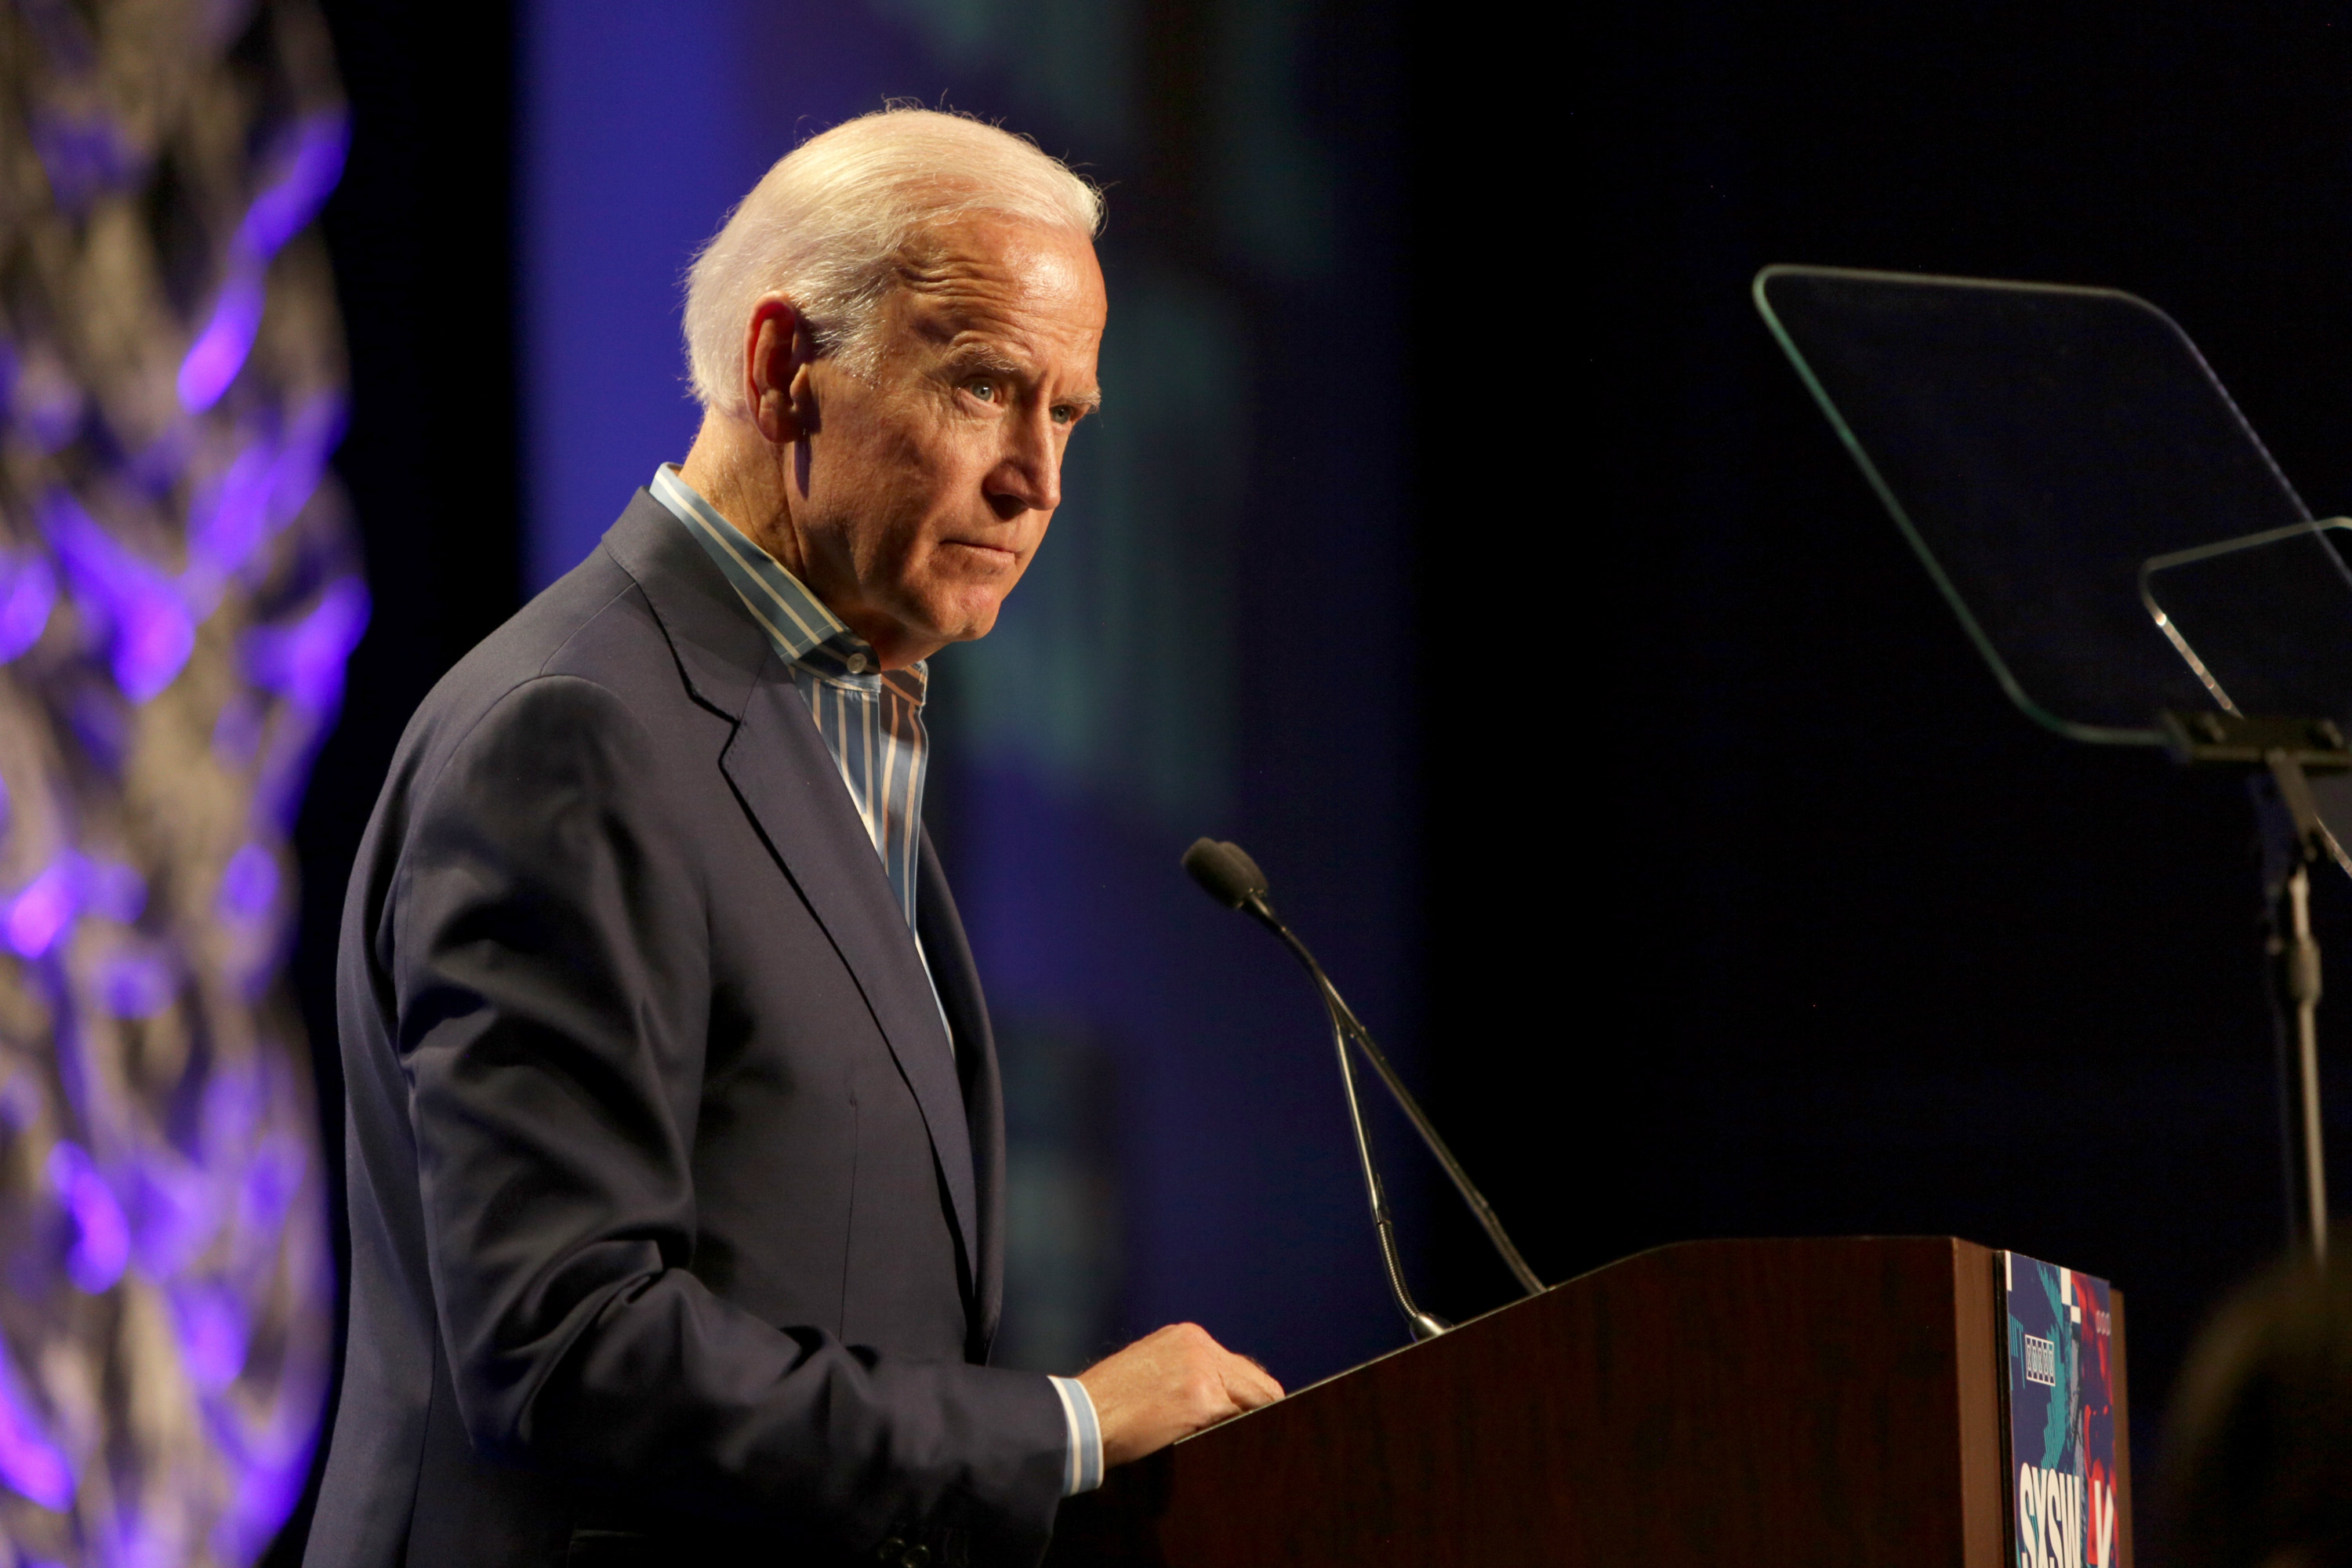 AUSTIN, TX - MARCH 12:  Vice President Joe Biden speaks onstage at "The Urgency Of Now: Launching The Biden Cancer Initiative' during 2017 SXSW Conference and Festivals at Austin Convention Center on March 12, 2017 in Austin, Texas.  (Photo by Mindy Best/Getty Images for SXSW) (Mindy Best&mdash;Getty Images for SXSW)